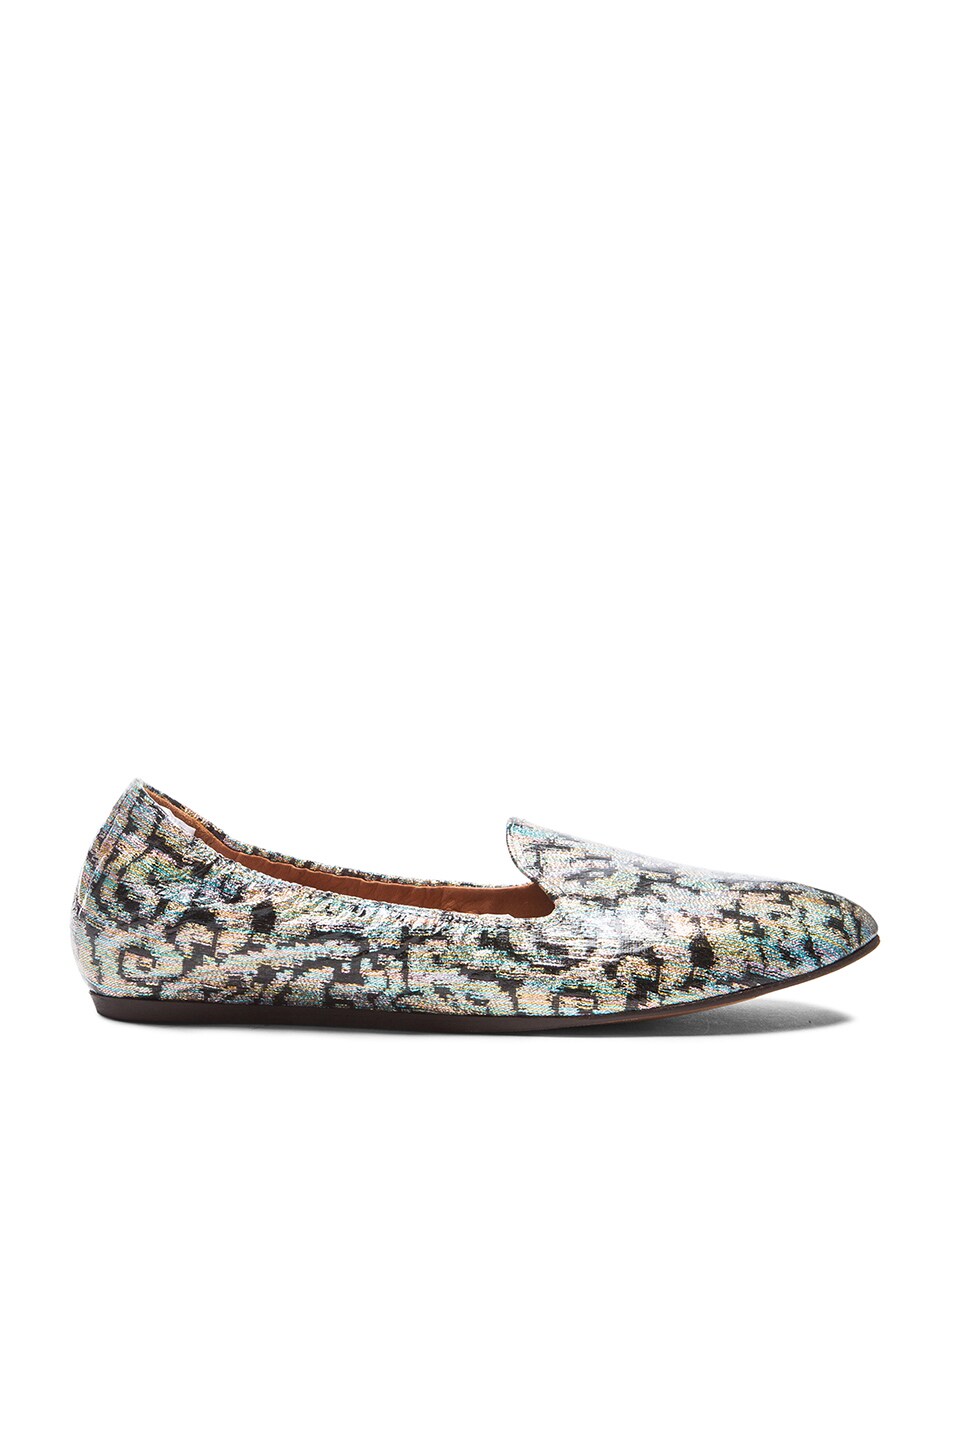 Image 1 of Lanvin Brocade Coated Fabric Slippers in Multi